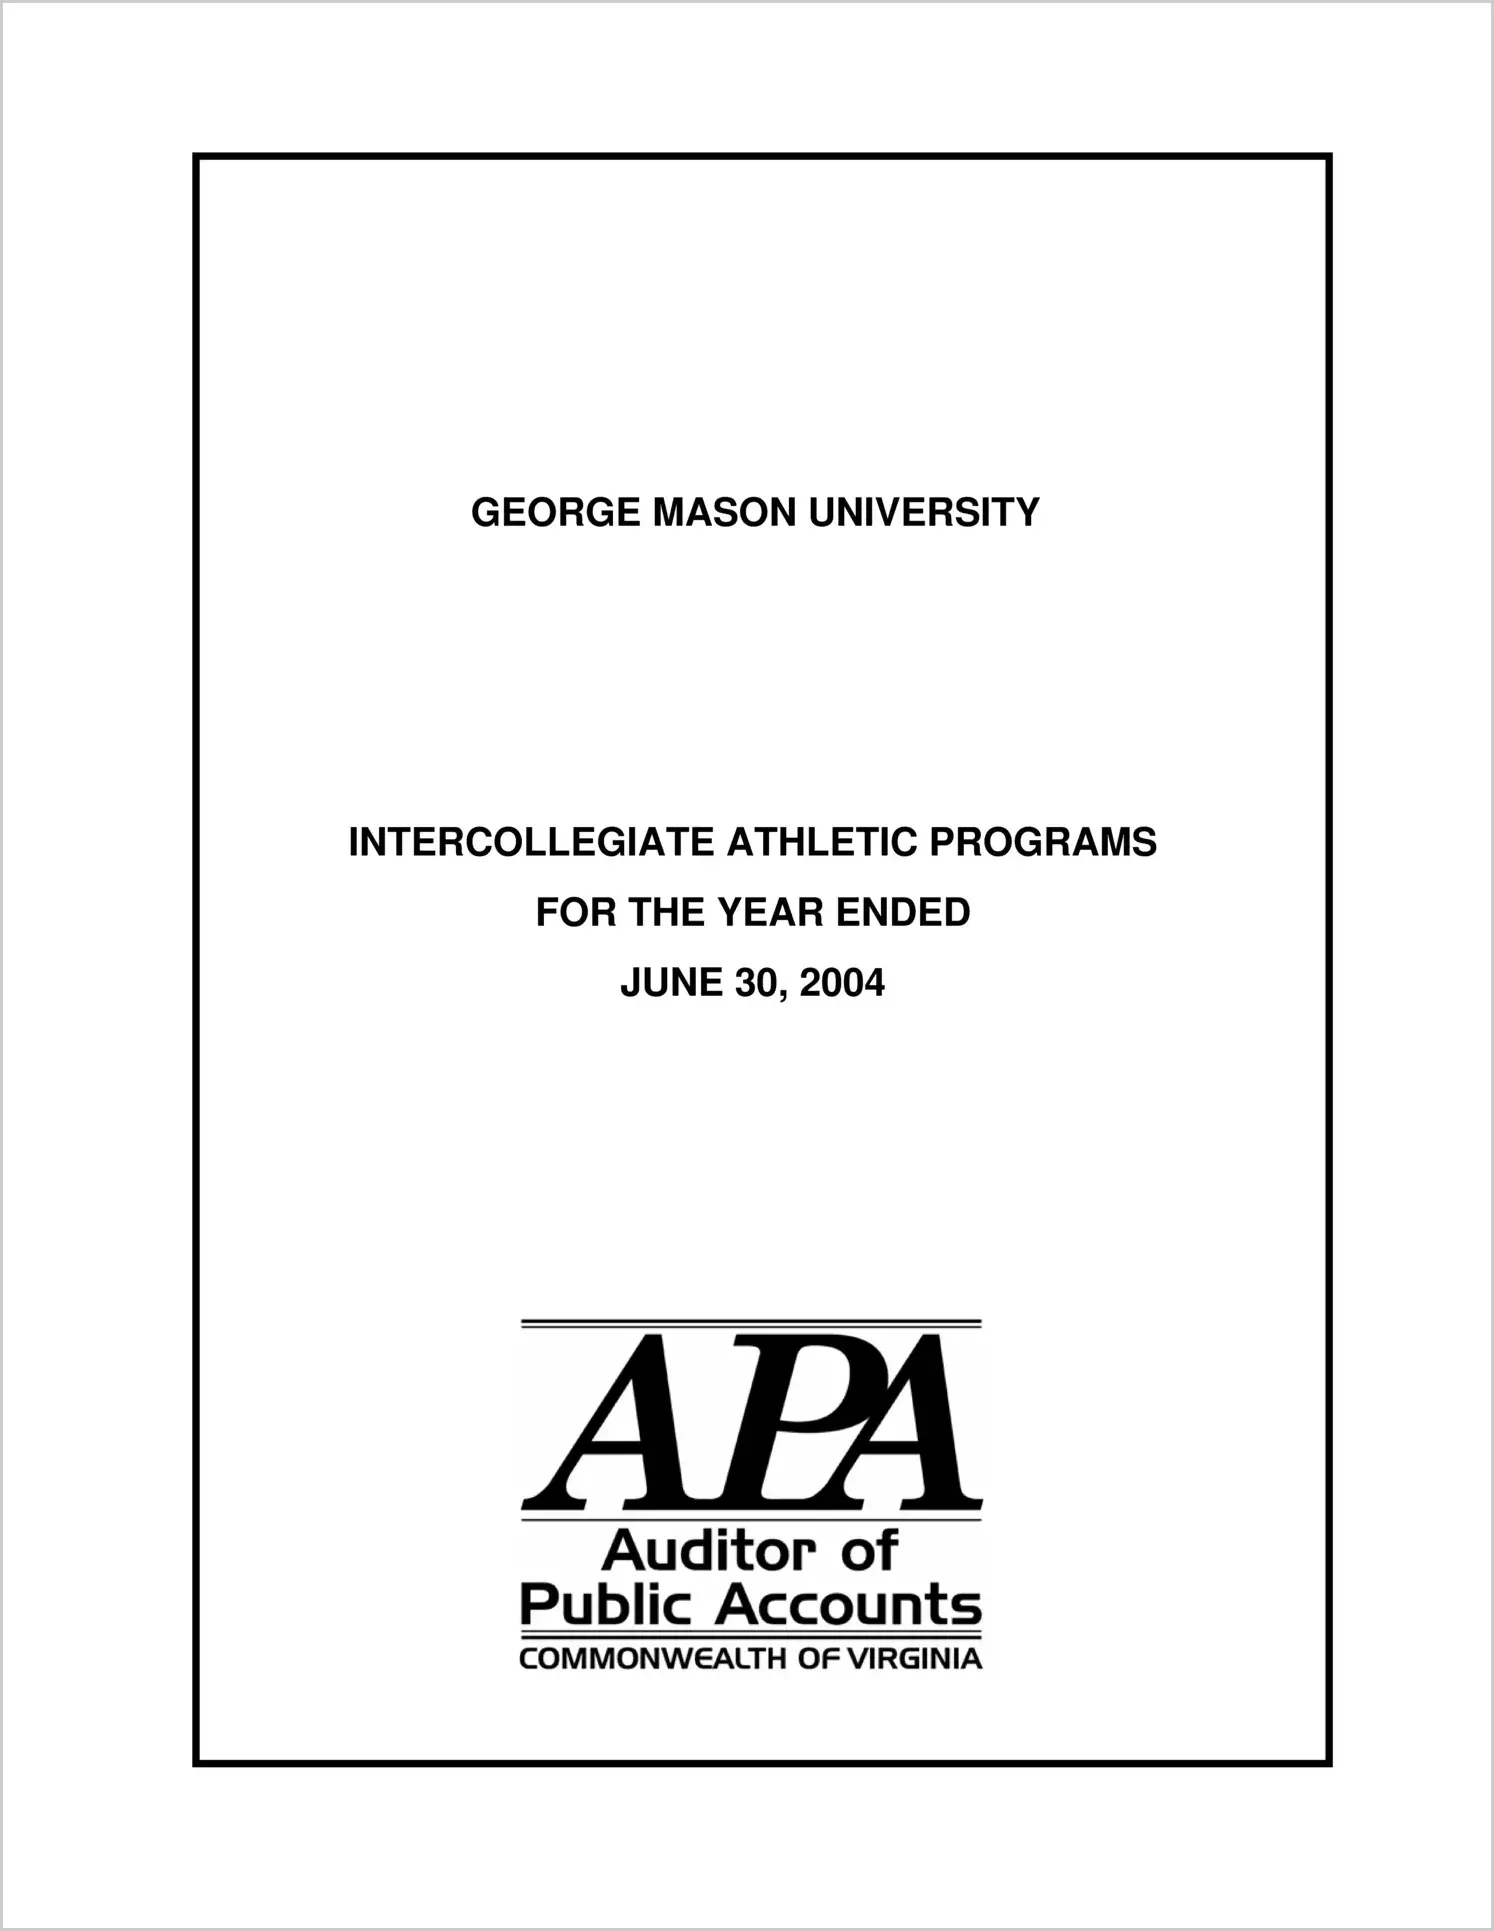 George Mason University Intercollegiate Athletic Programs for the year ended June 30, 2004